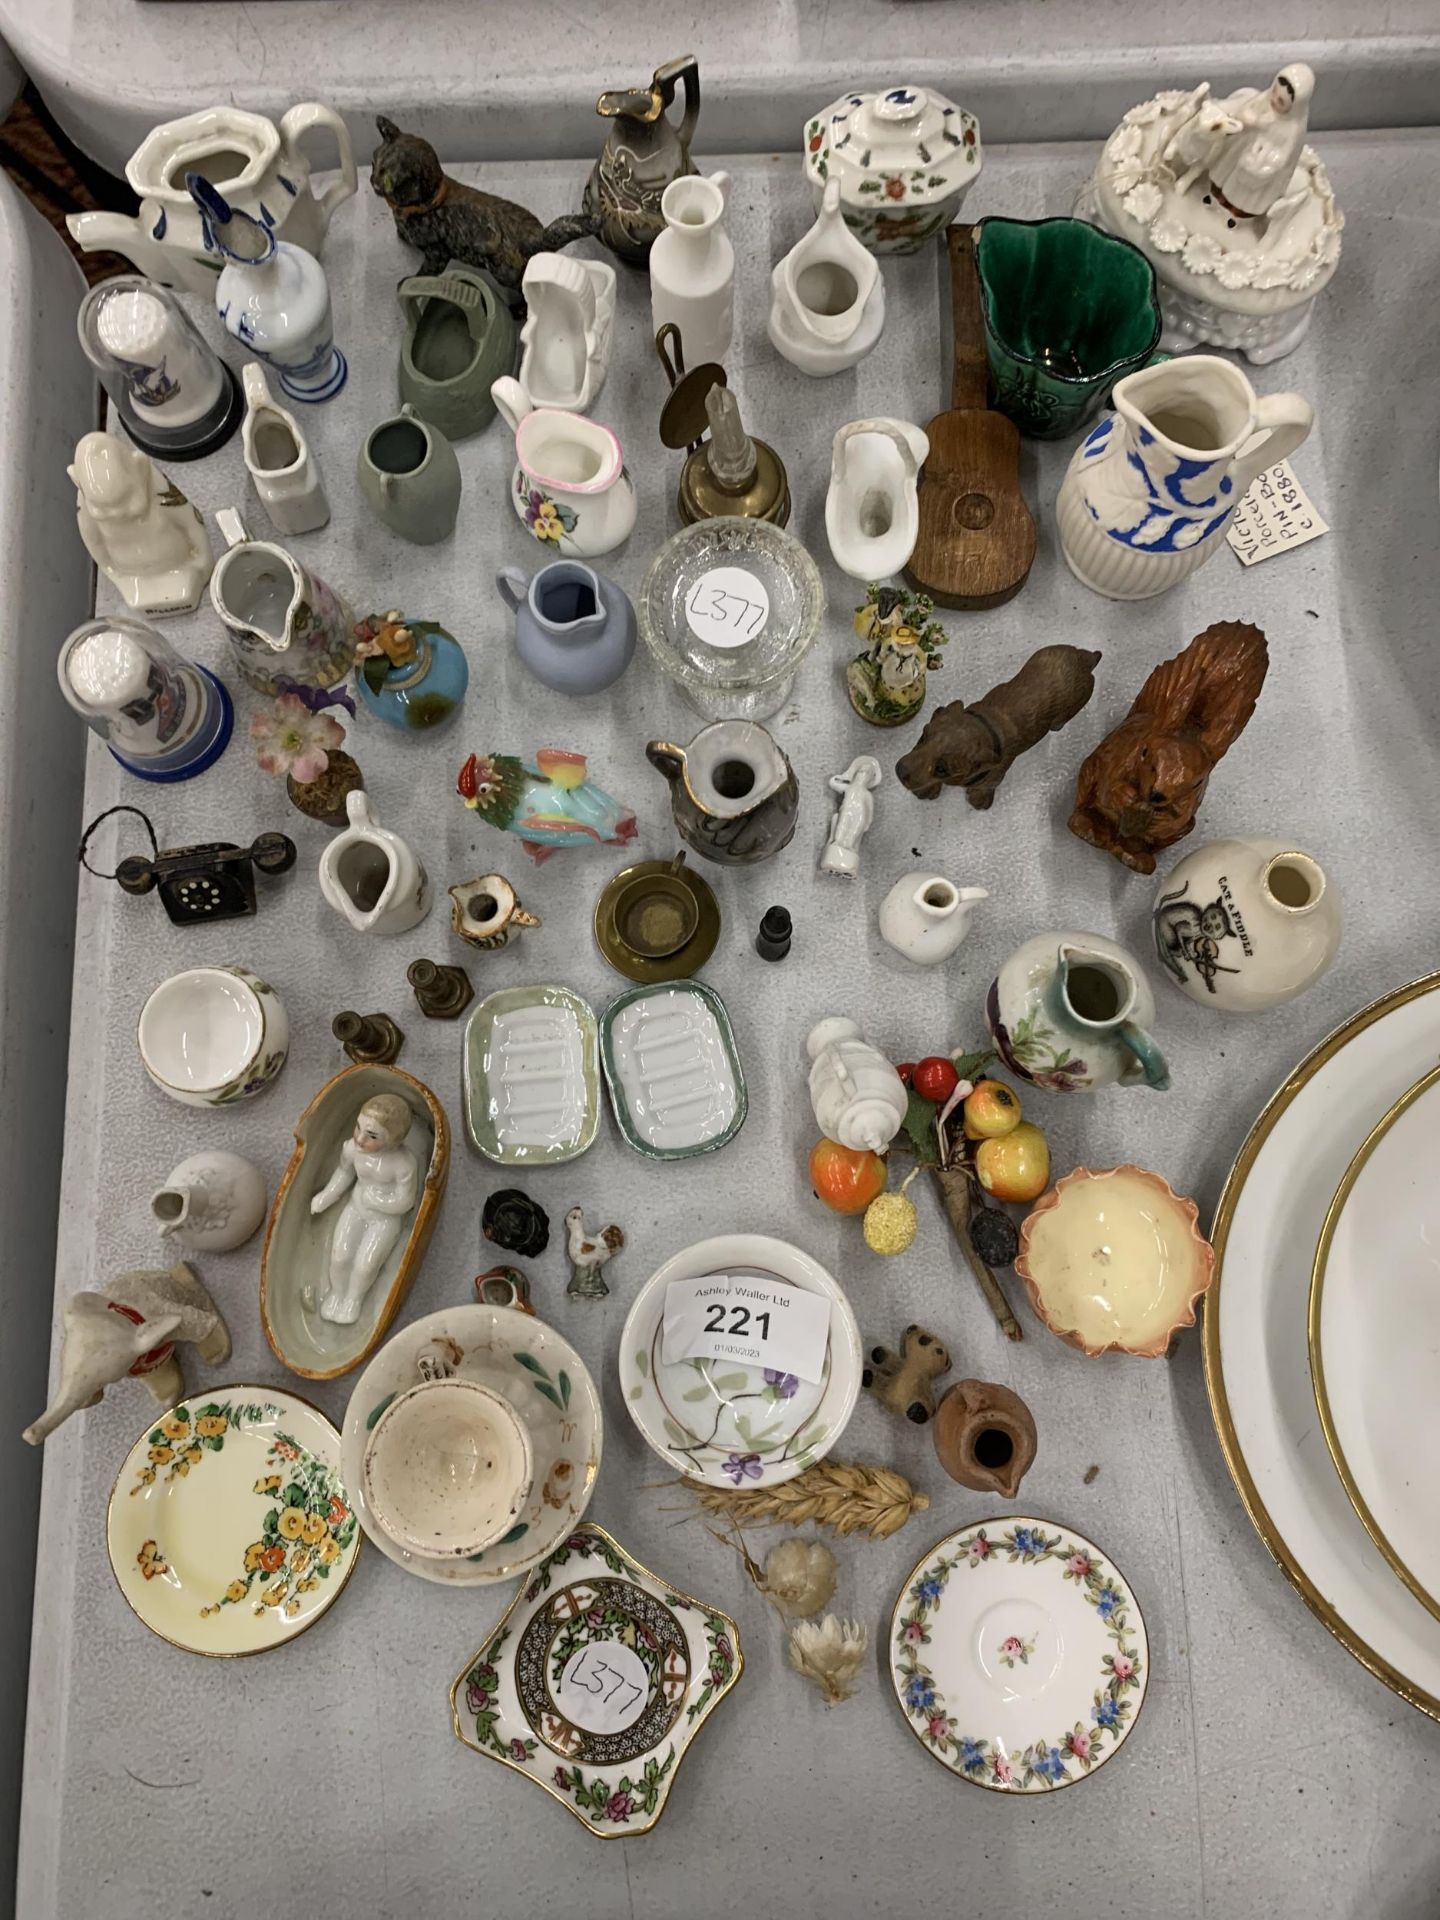 A LARGE QUANTITY OF MINIATURE ITEMS TO INCLUDE JUGS, POTS, ANIMALS, PLATES, ETC